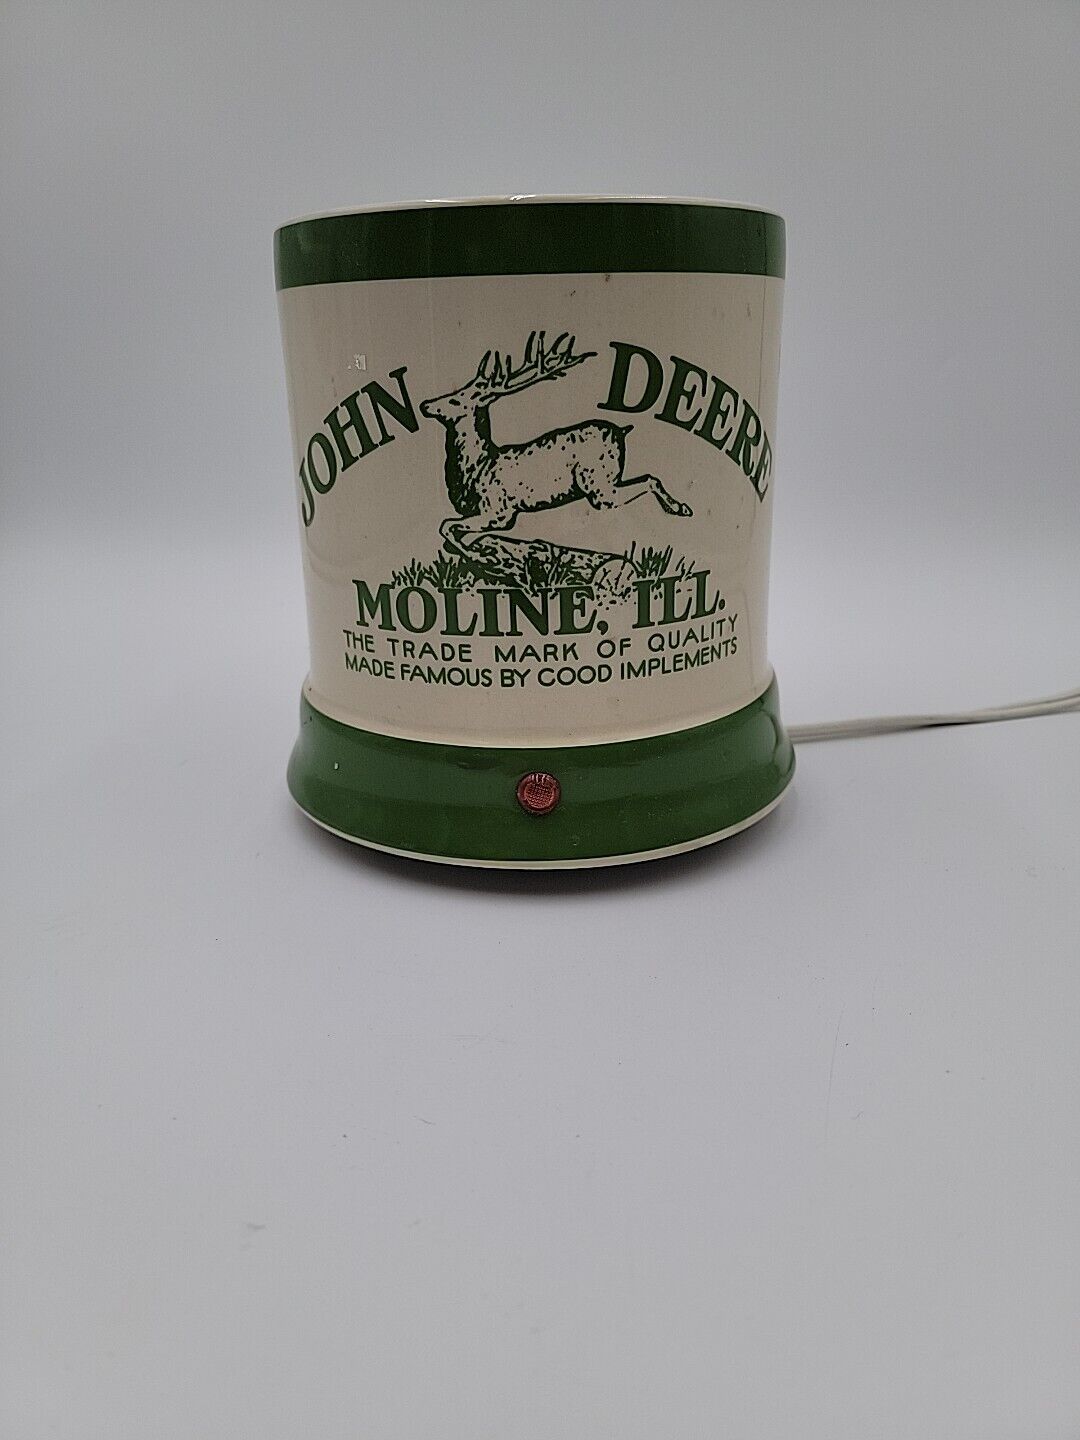 Vintage John Deere Electric Candle Warmers For Large Candles Tested Works 